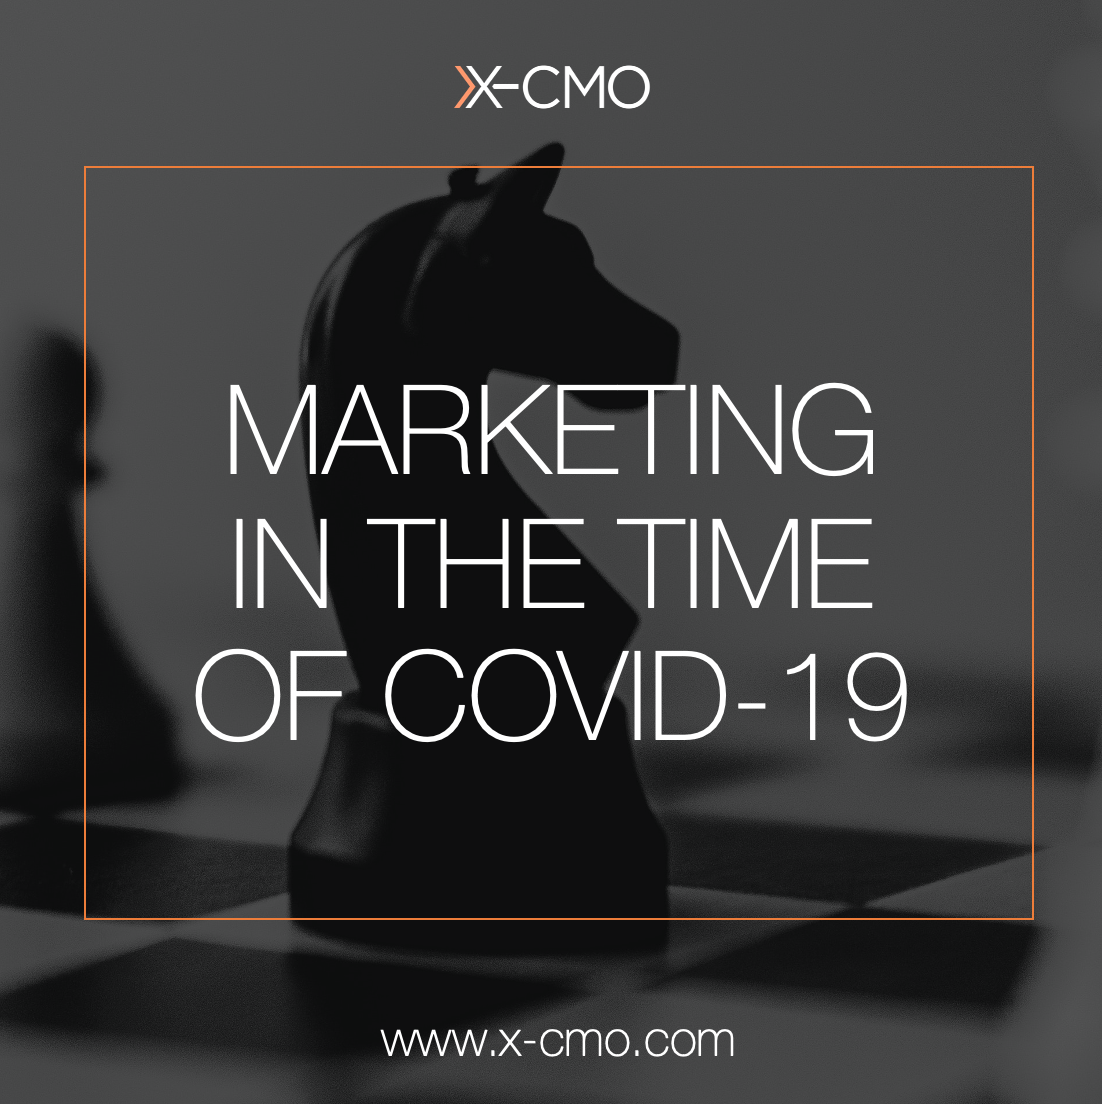 MARKETING IN THE TIME OF COVID-19